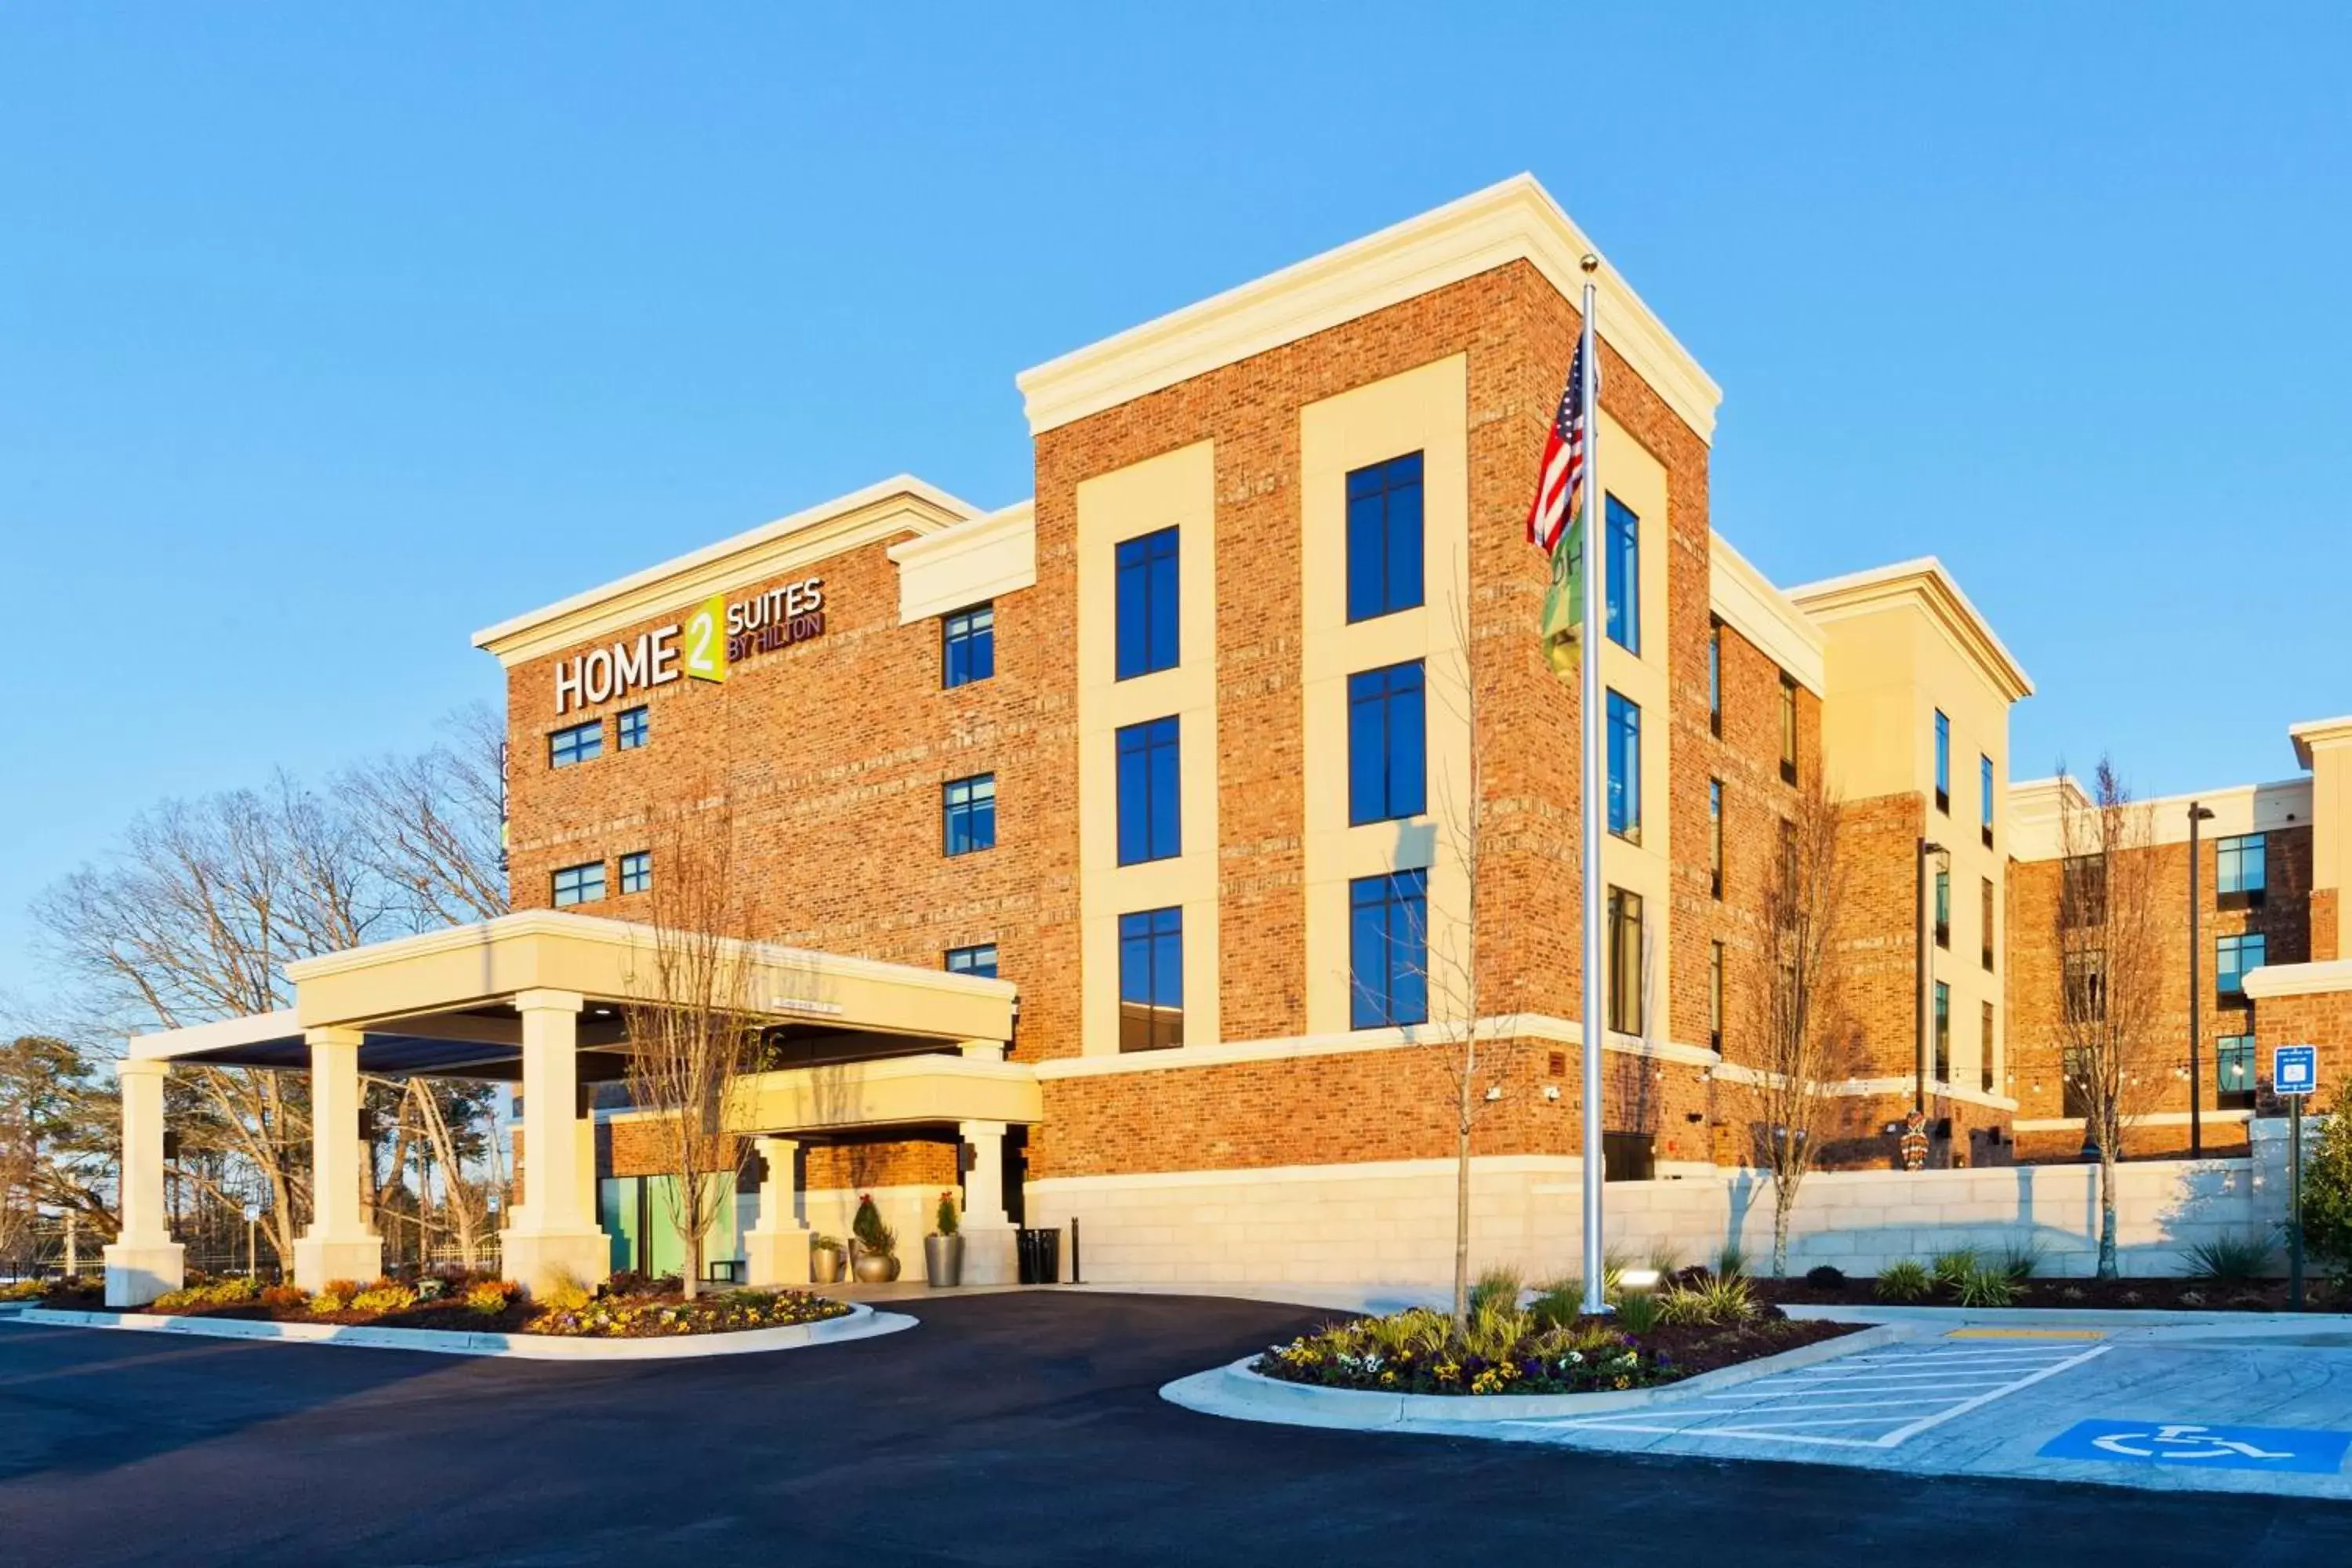 Property Building in Home2 Suites By Hilton Alpharetta, Ga